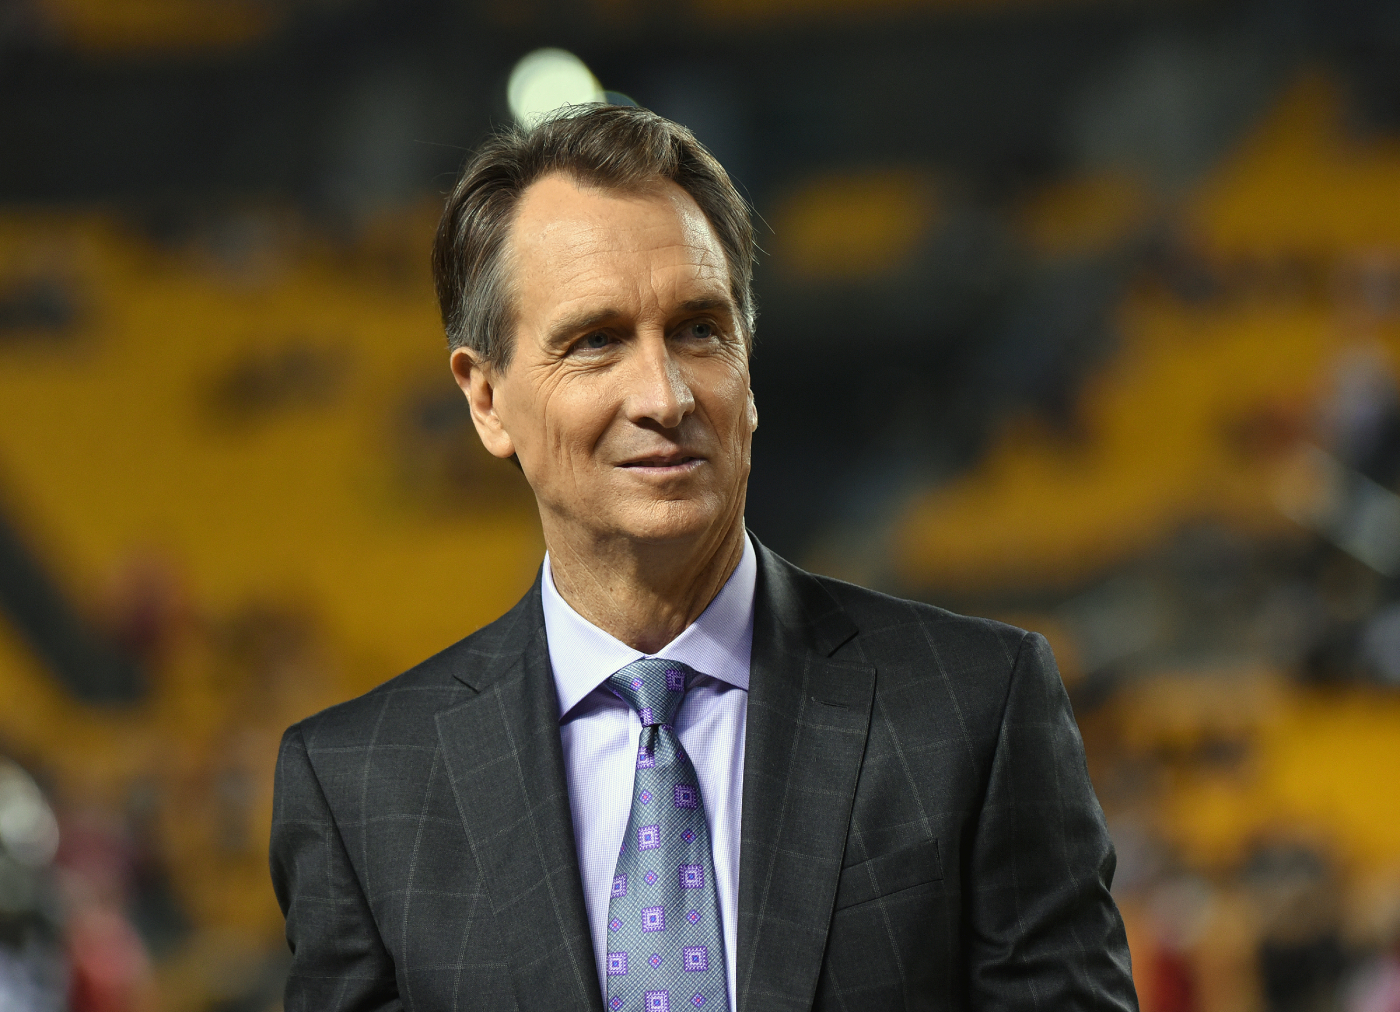 After a nice career with the Bengals, Cris Collinsworth has had a pretty successful career as a broadcaster. His son is now also successful.